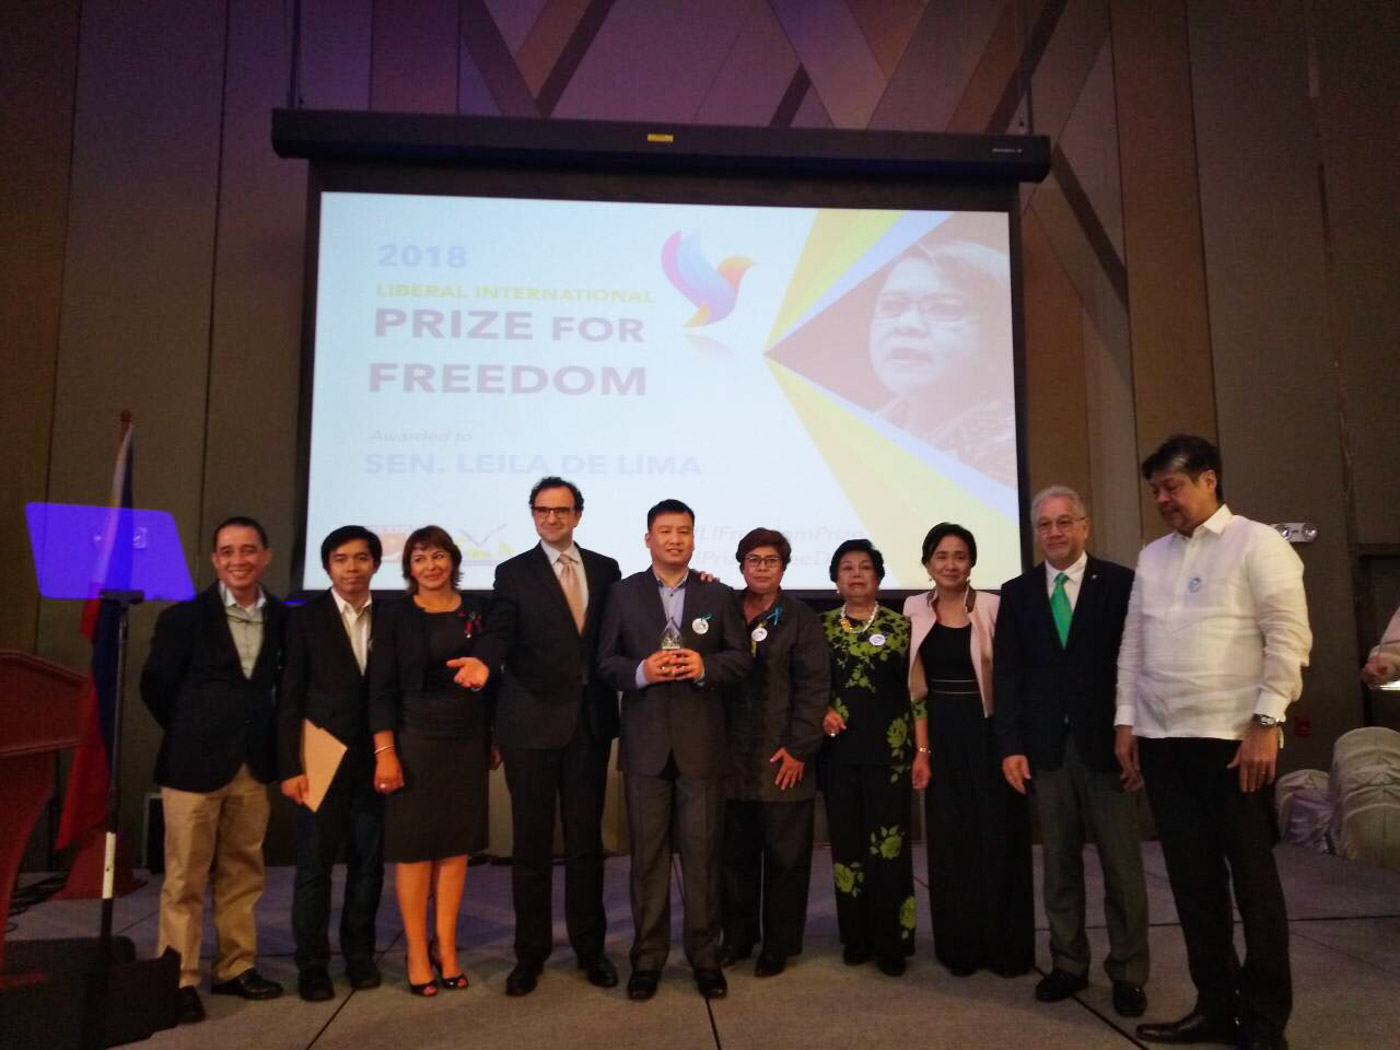 HONOR. Members of Senator Leila de Lima's family pose for a photo after receiving the Liberal International's Prize for Freedom award. Photo by Alexa Cruz/Rappler    